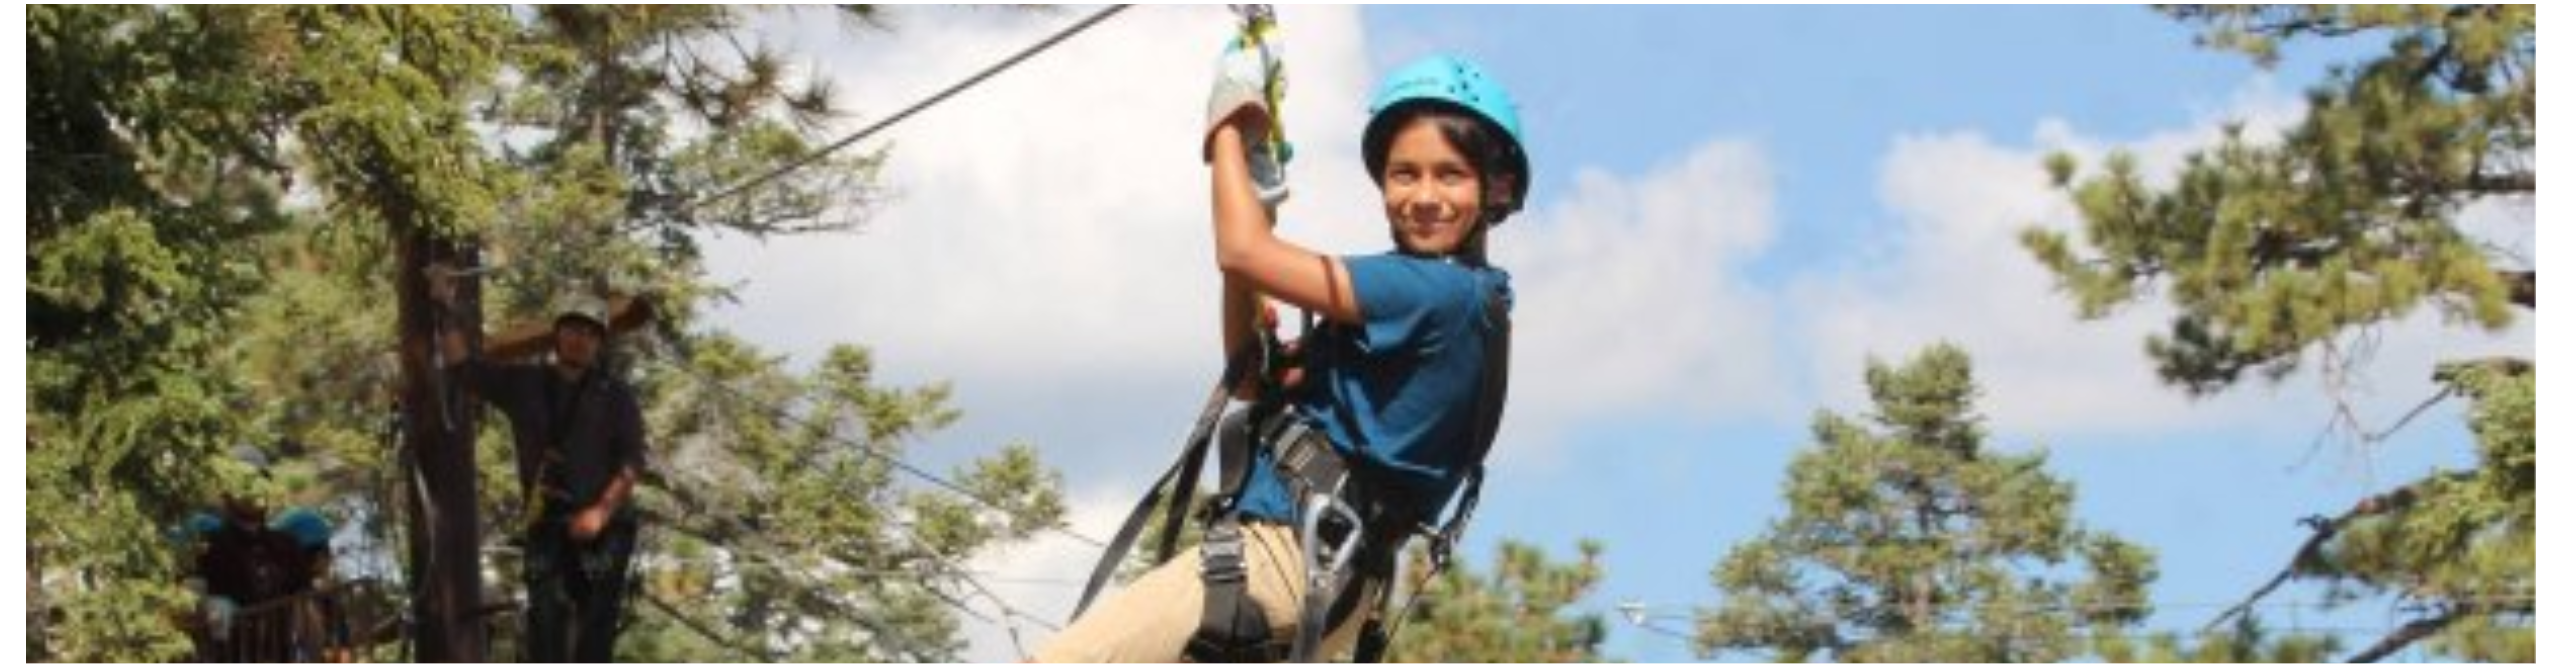 Young boy on a zip line